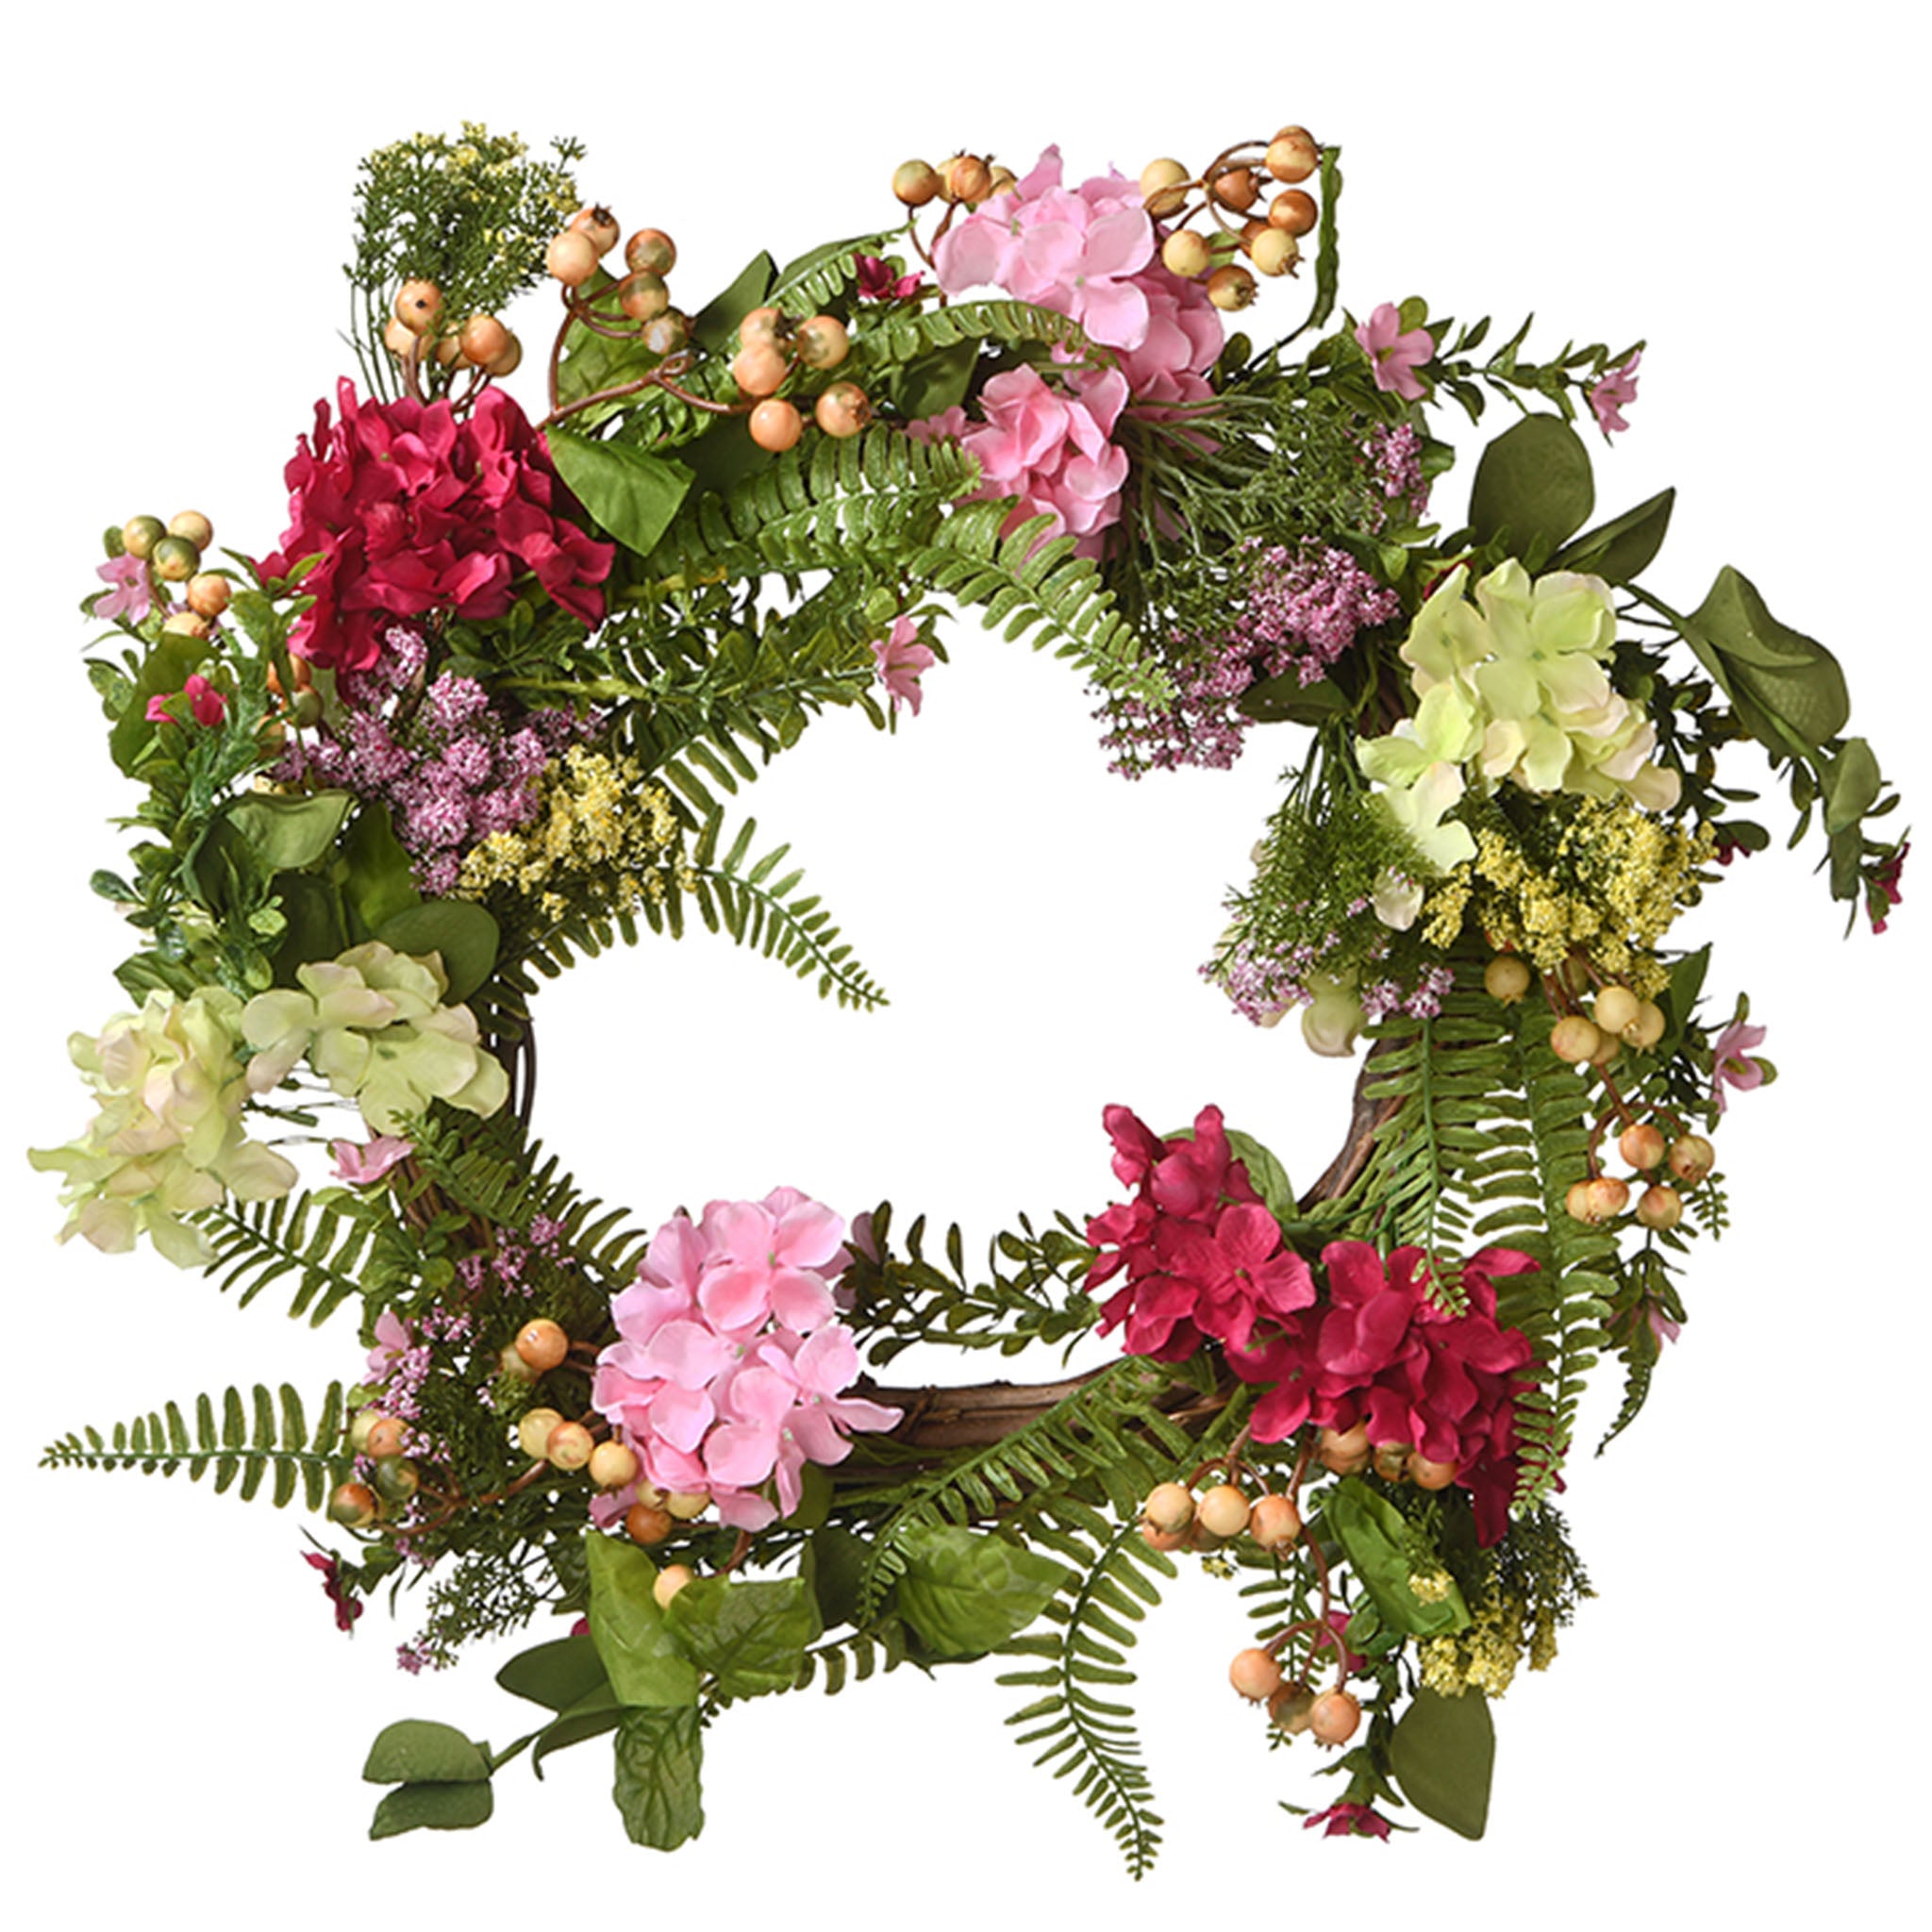 National Tree Company Artificial Hanging Wreath, Woven Branch Base, Red, Pink and Yellow Hydrangea Blooms, Berry Clusters, Wild Flowers, Fern Fronds, Spring Colelction, 22 Inches